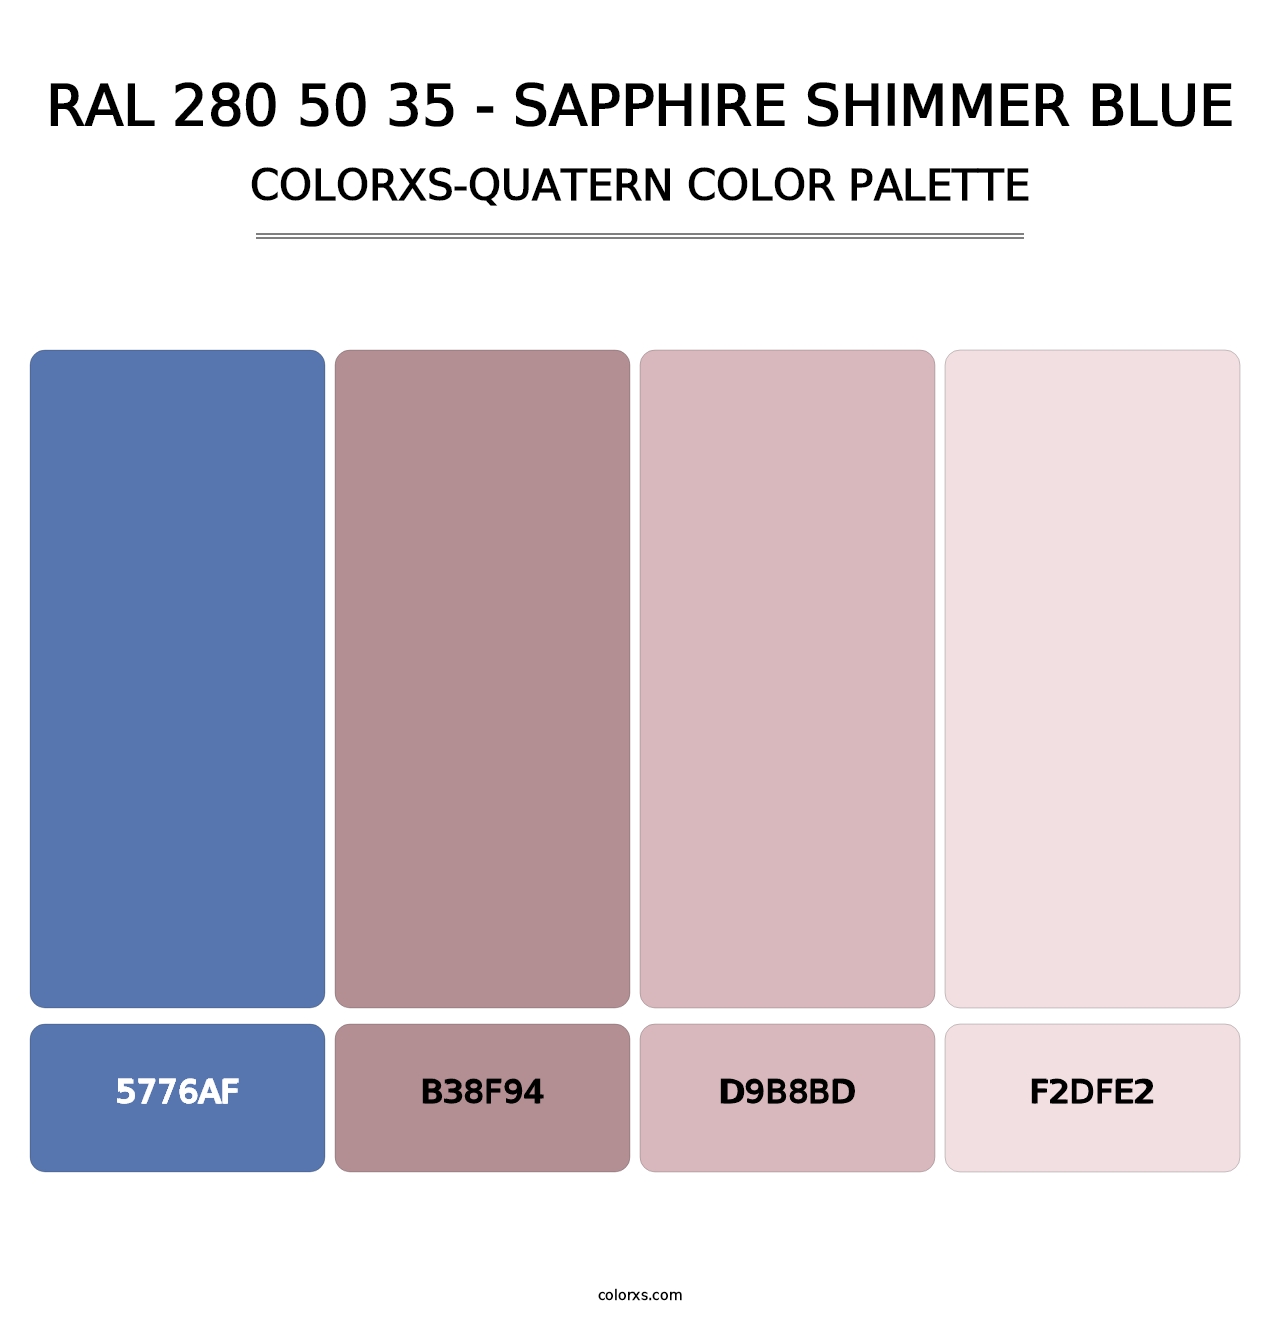 RAL 280 50 35 - Sapphire Shimmer Blue - Colorxs Quatern Palette